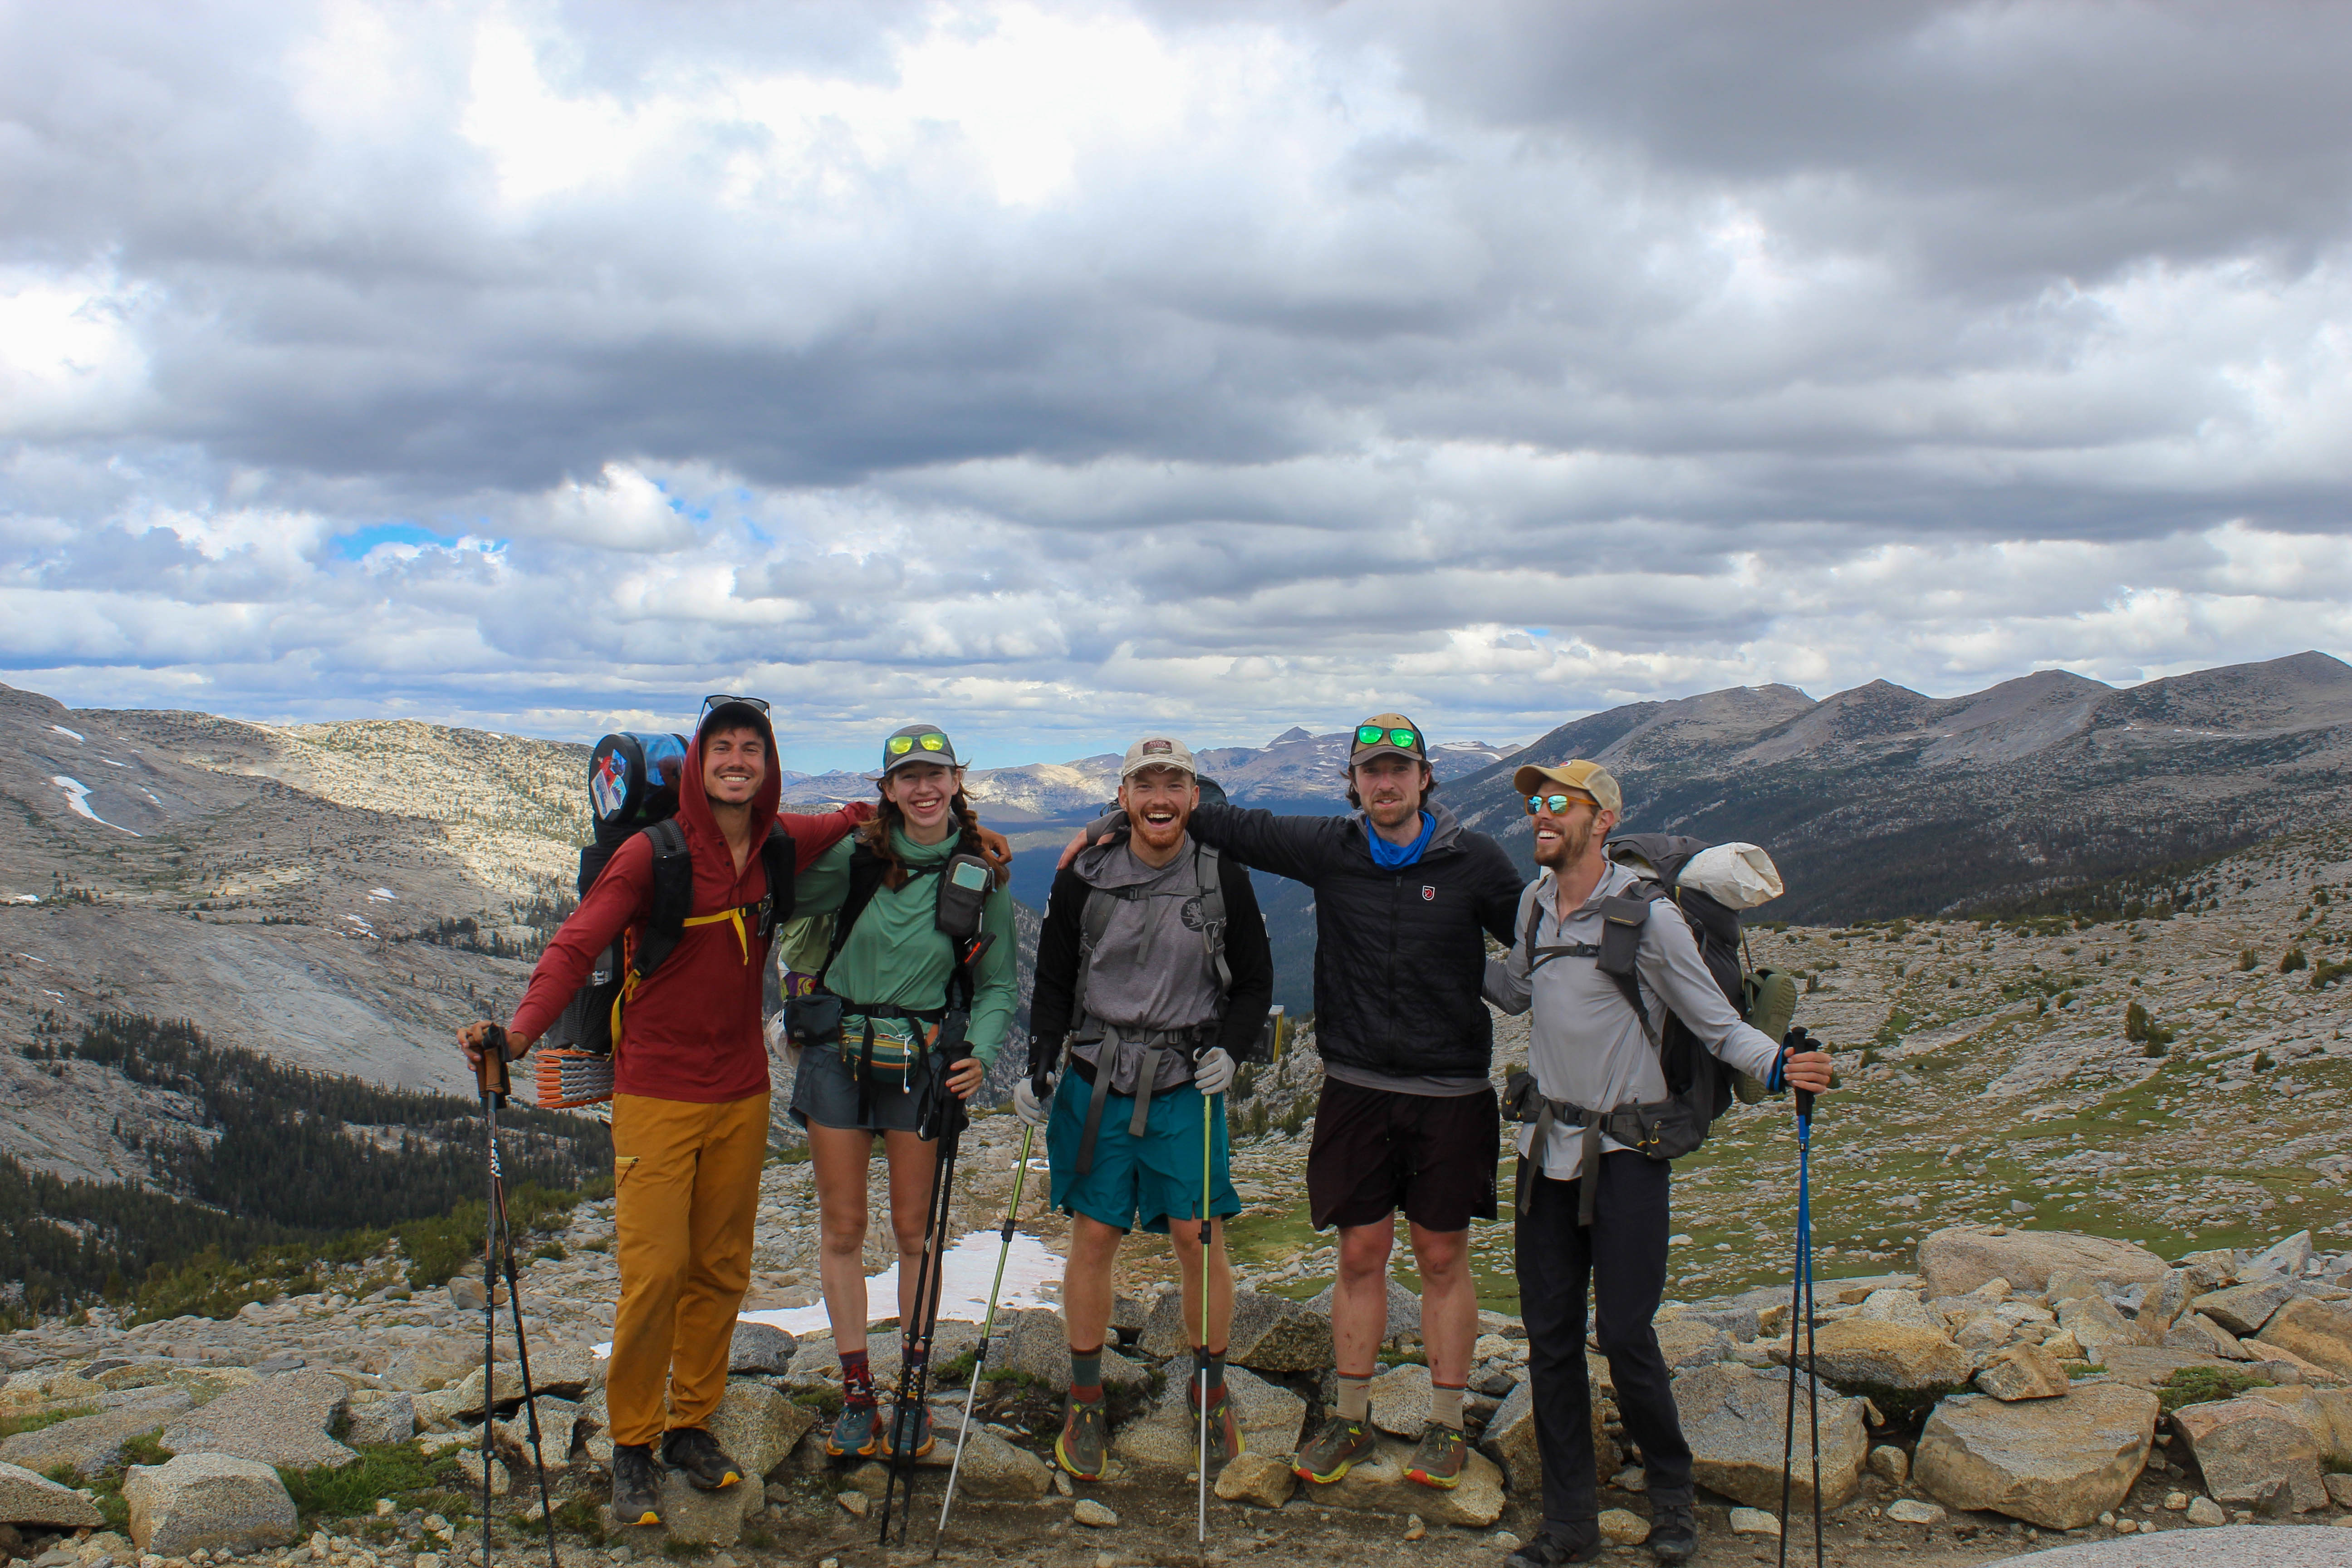 The five of us—Jib, Double Dip, me, Chunks, and Chicken Legs—stand at the top of our final mountain pass.